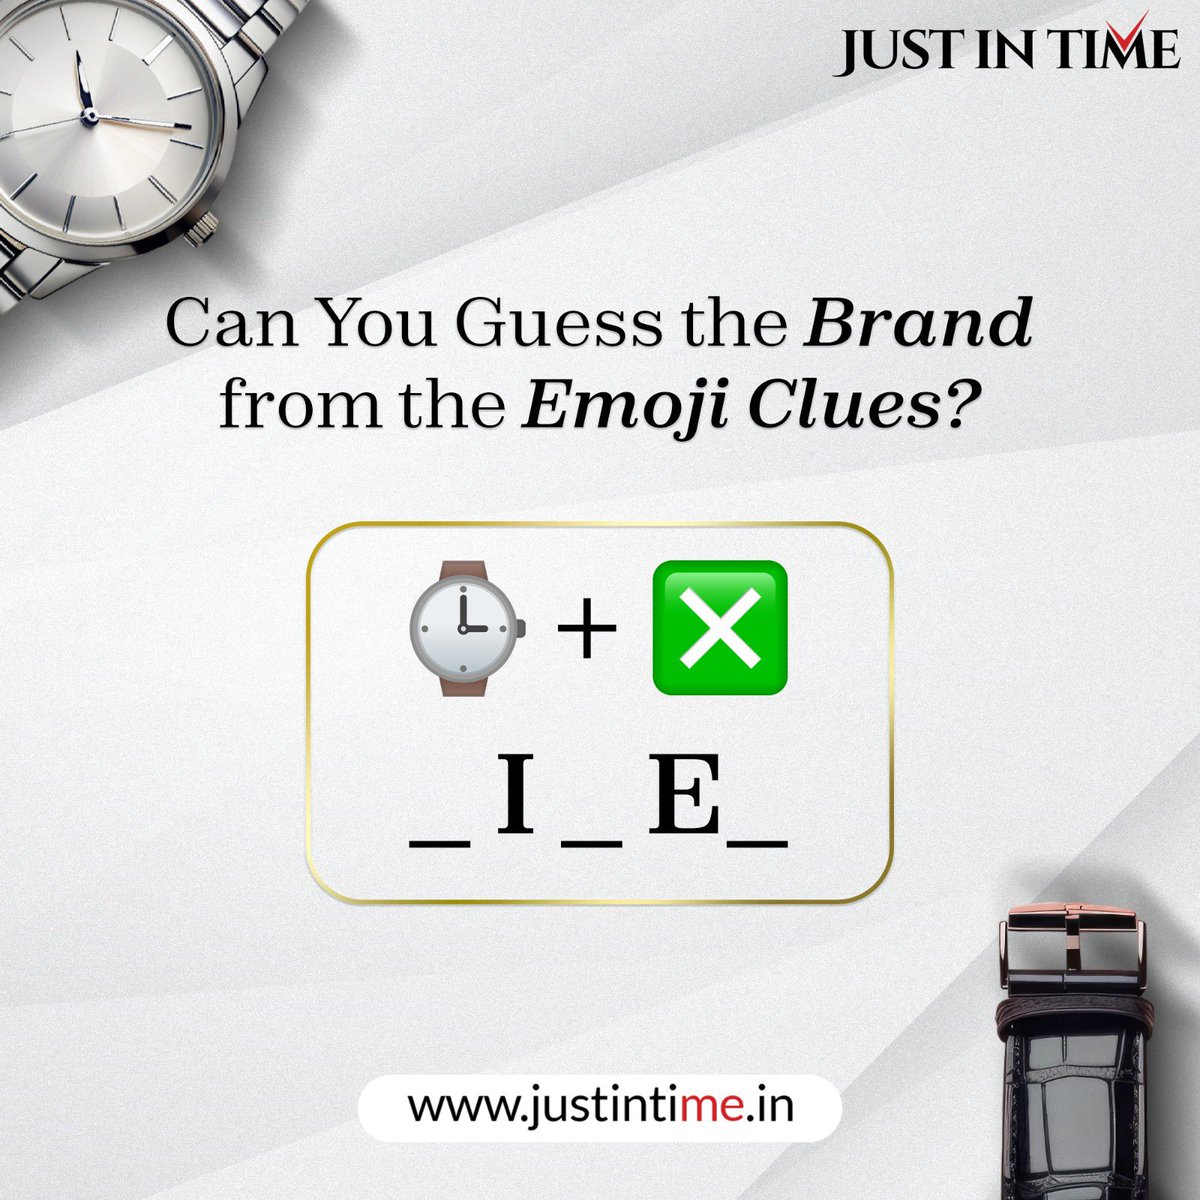 Time to test your watch brand knowledge! Can you guess the brand based on these emojis? Leave your answers in the comments below! 
.
.
.
.

#JustInTime #JustInTimeWatches #FunTime #FunActivity #QuizTime #Brand #GuessTheBrand #CommentBelow #Fun #Watches